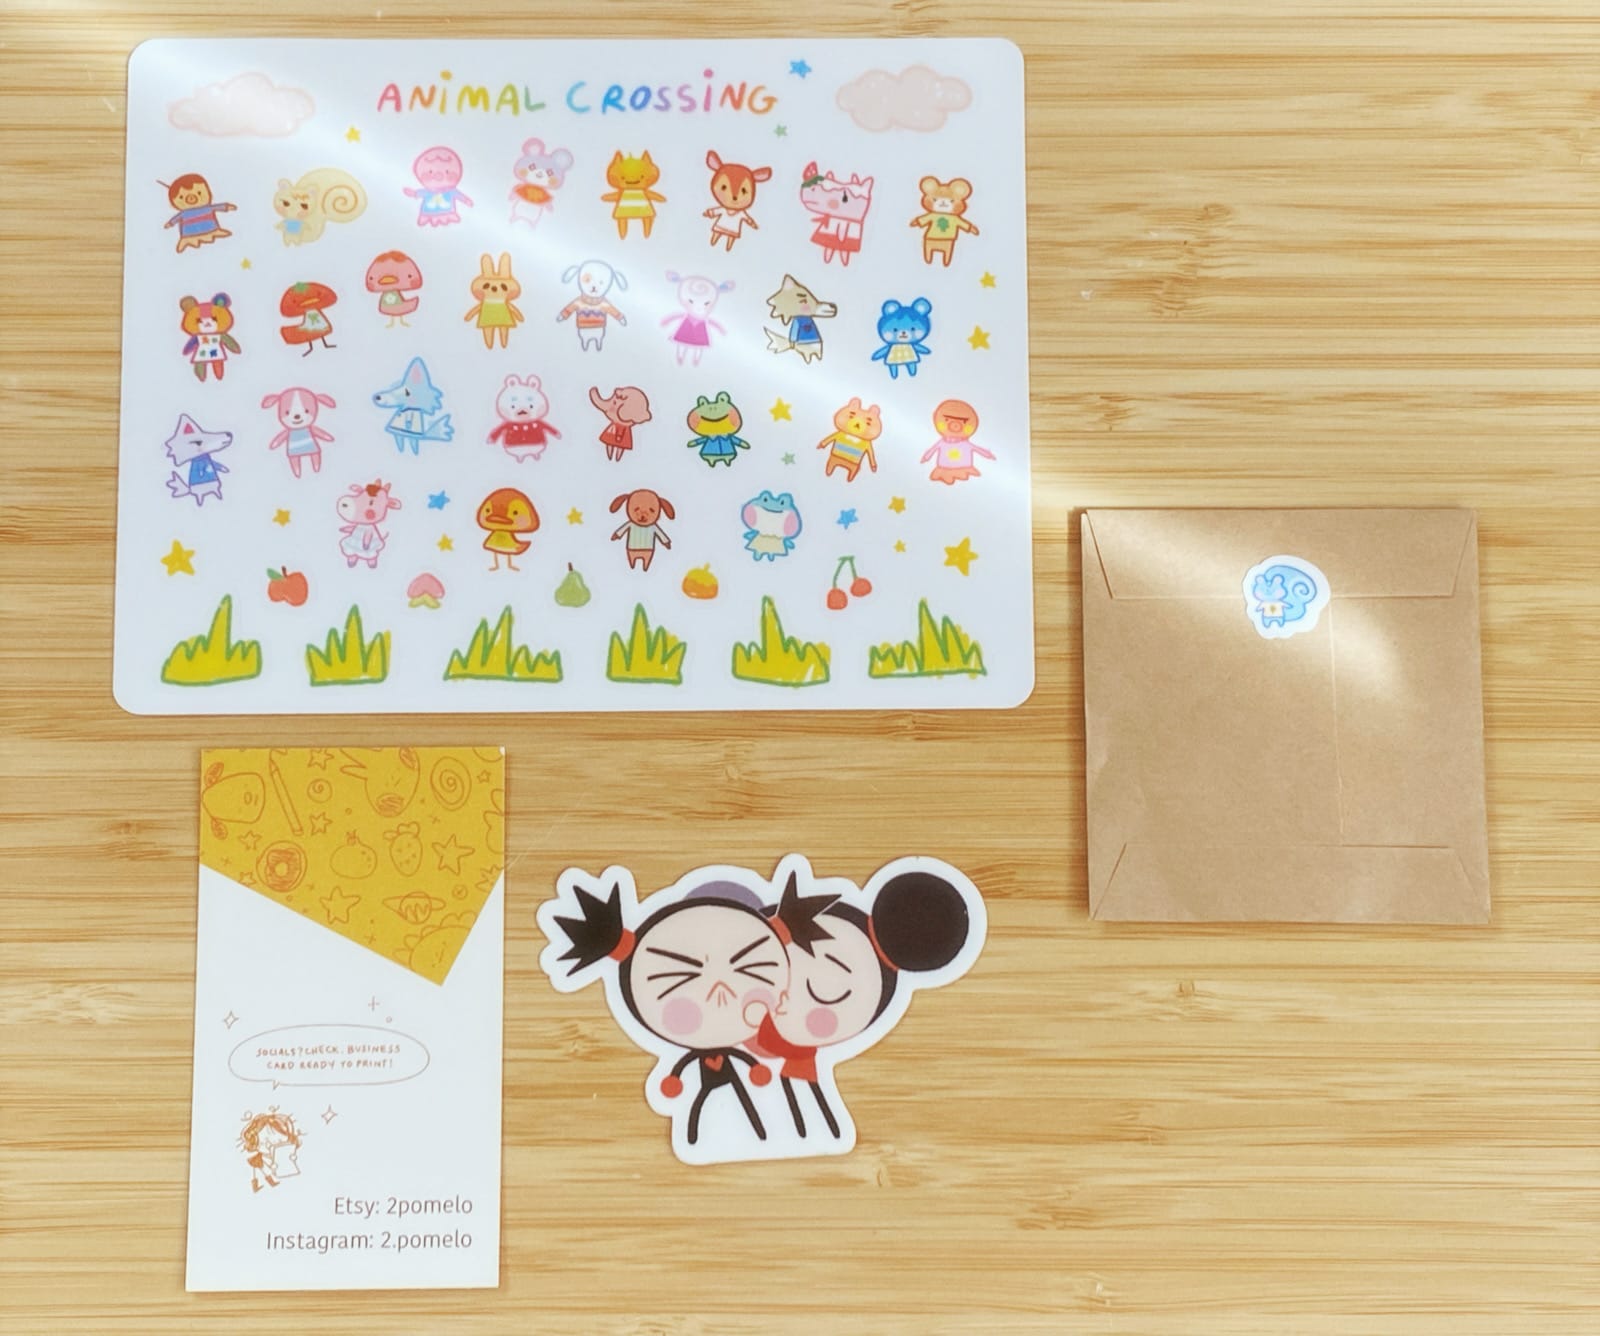 Animal Crossing sticker sheet with various animals from the game, a business card for the maker, 2 Pomelo, and a small brown envelope with a mystery batch of Animal Crossing stickers. 